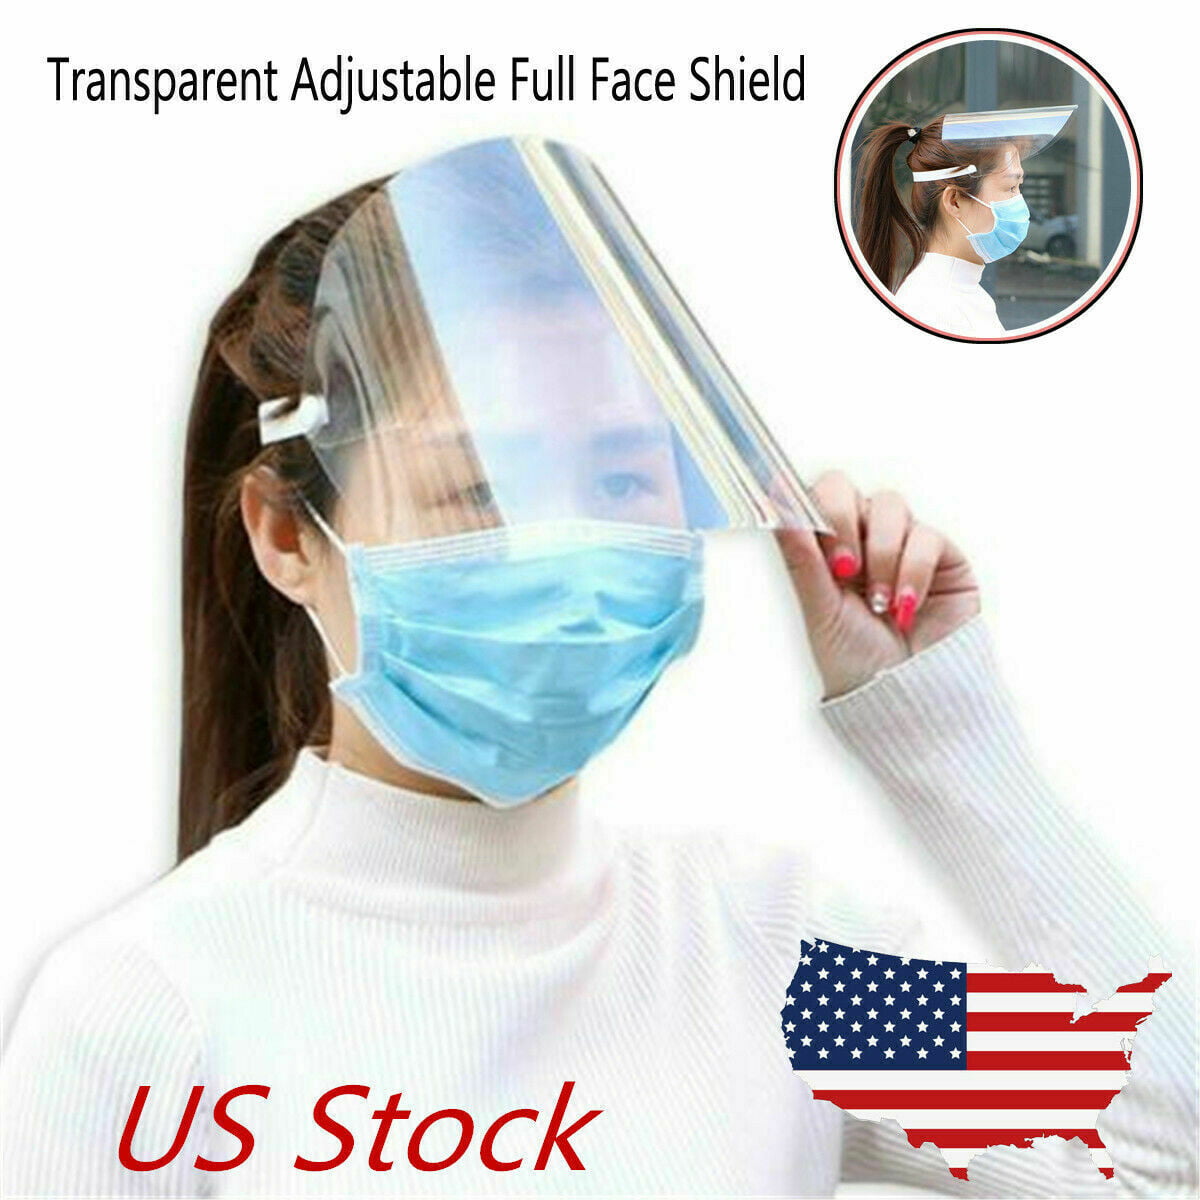 Details about   Safety Face Shield Full Face Clear Anti Fog Transparent Work Industry E b 71 